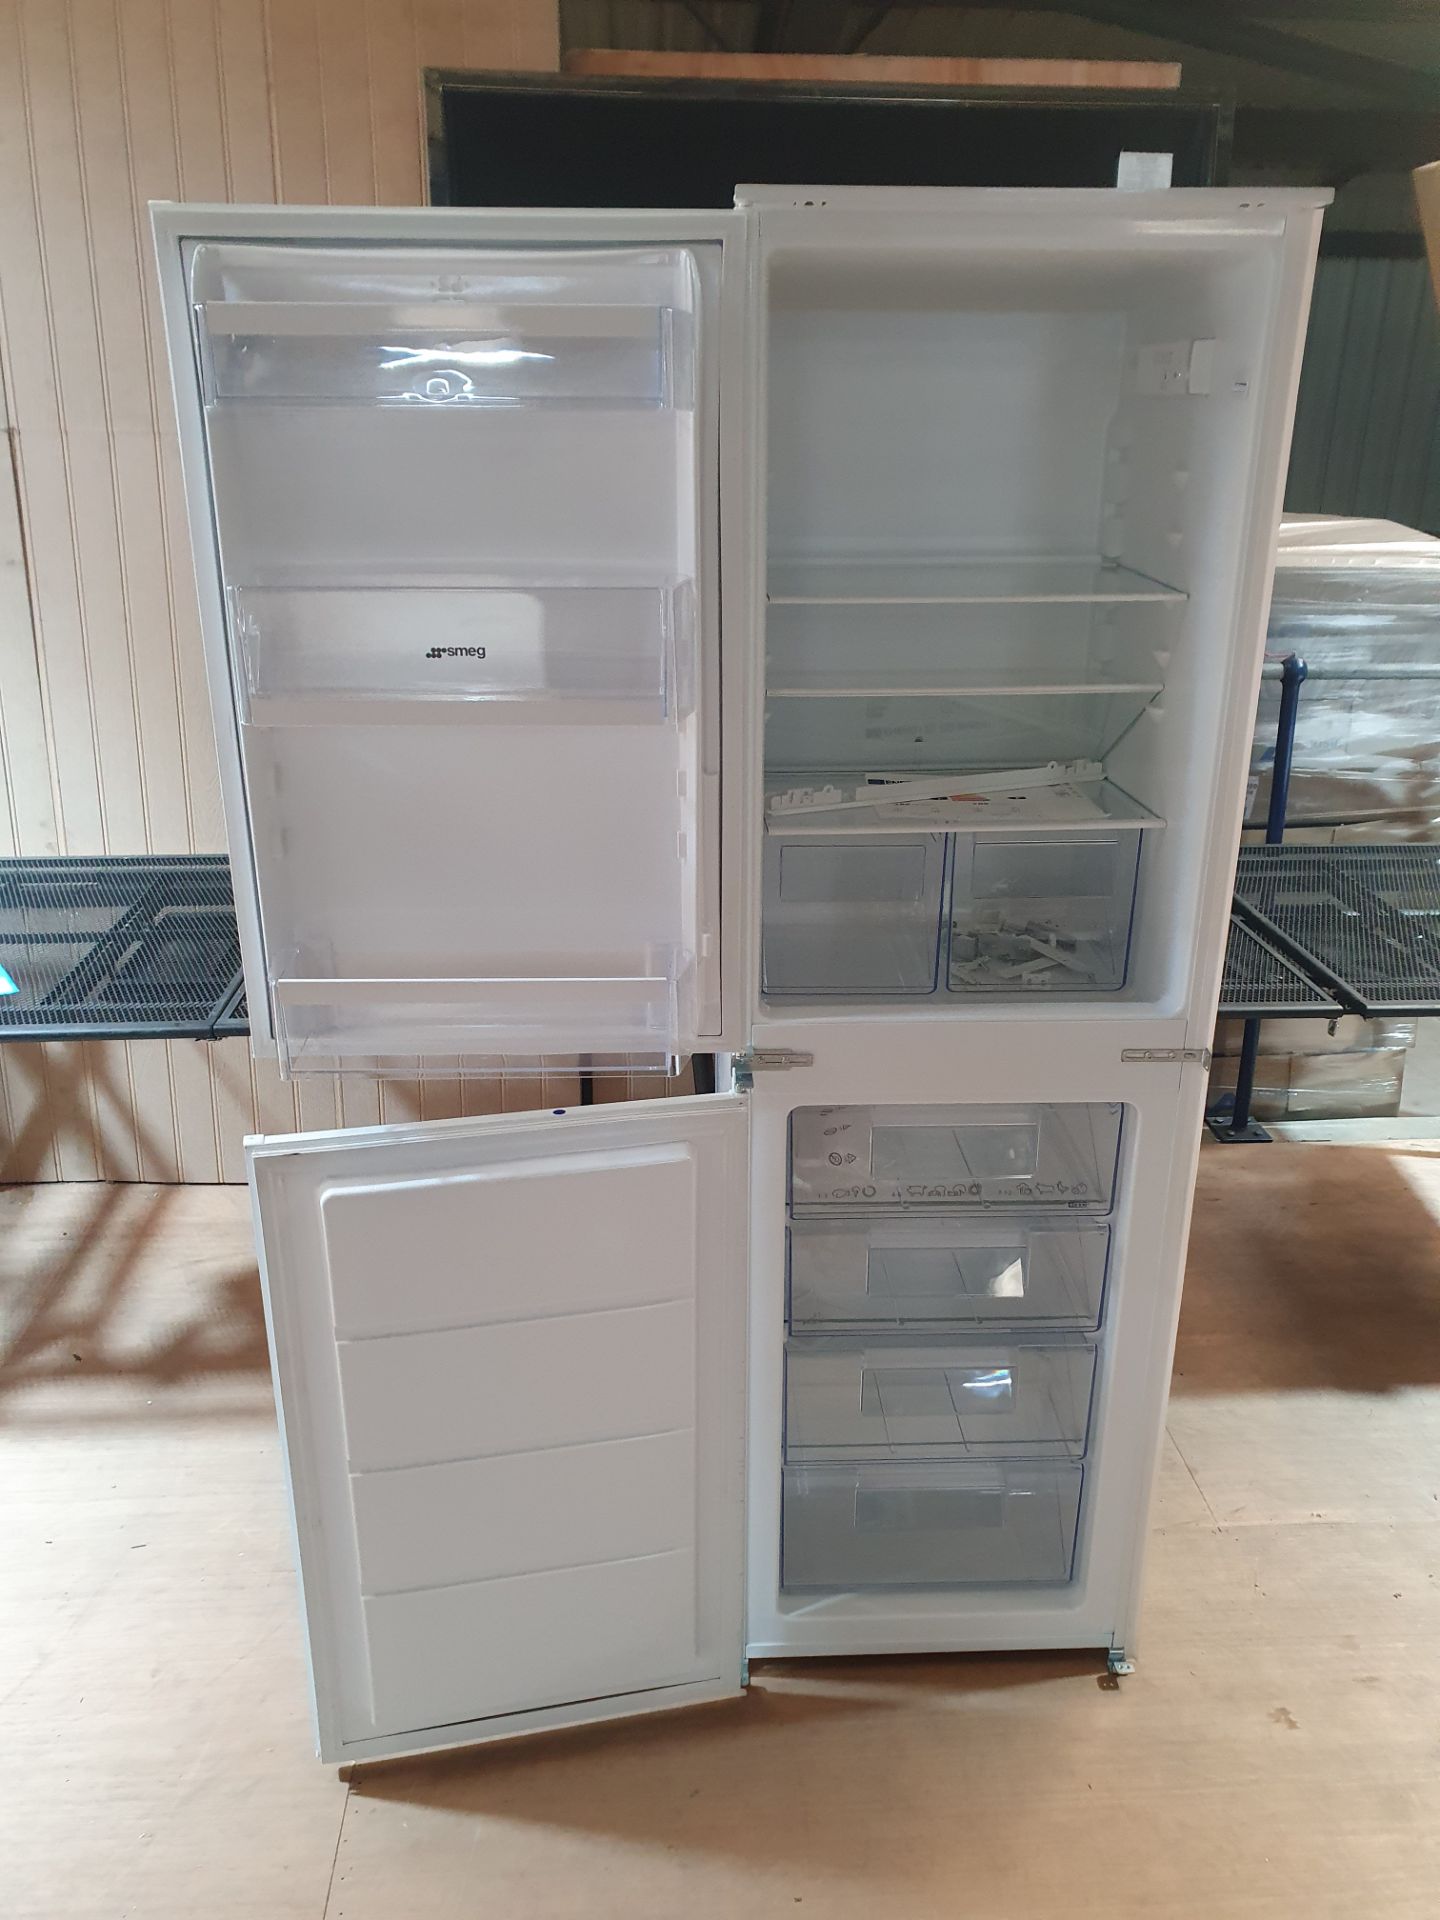 Current Online Price £859. Smeg Universal Built In Right Hinge Refrigerator White UKC4172F - Image 2 of 16